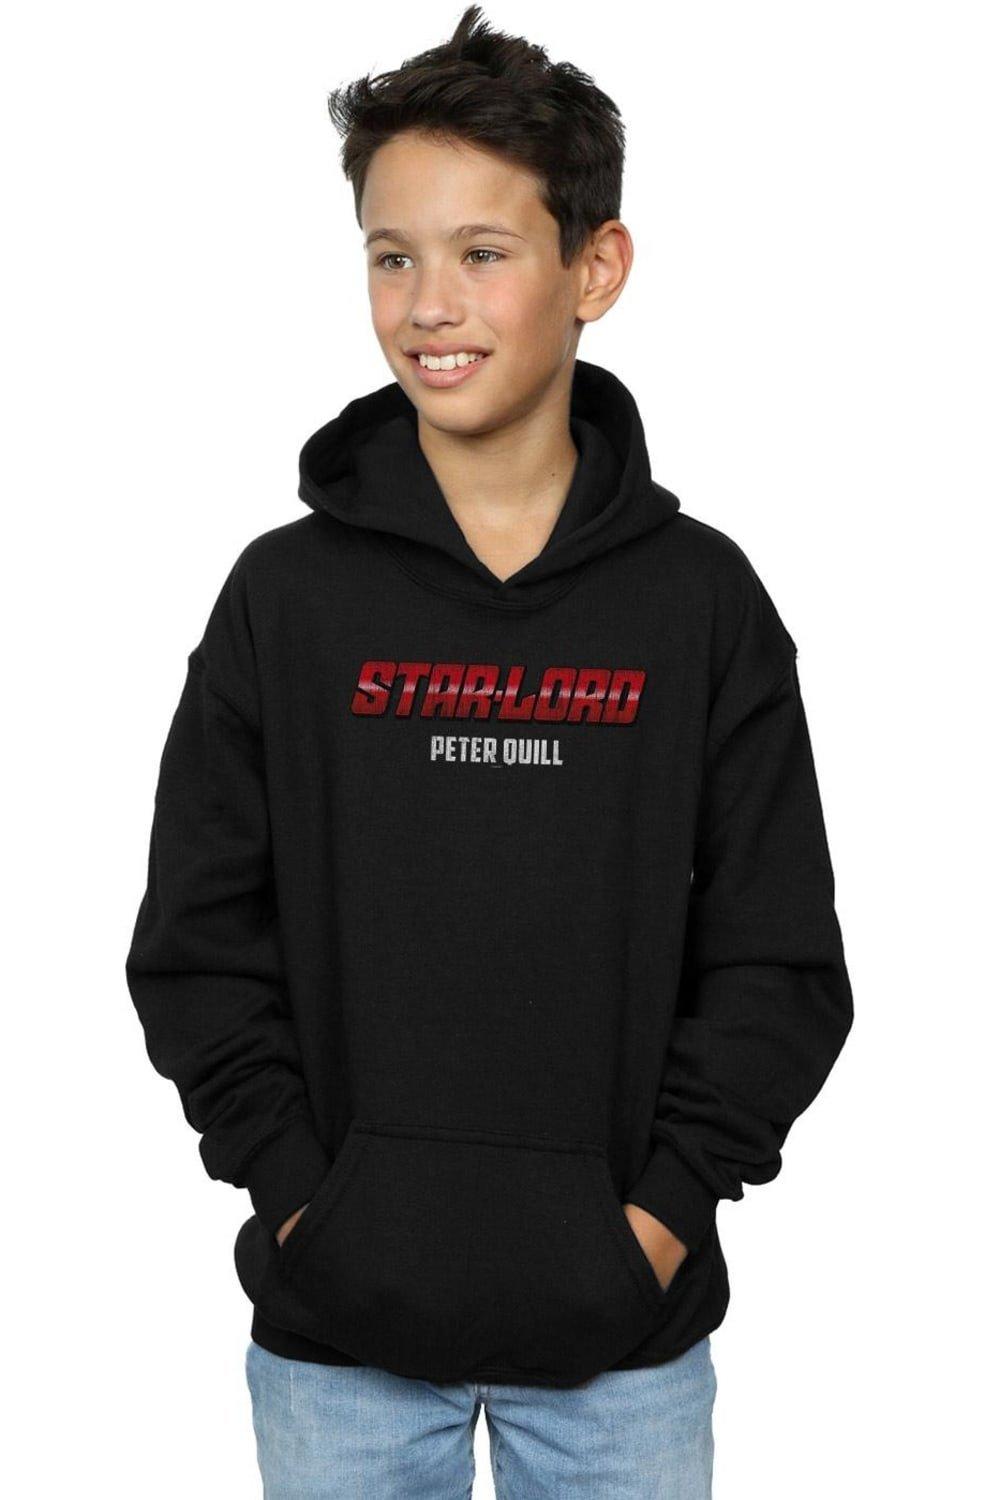 Star Lord AKA Peter Quill Hoodie